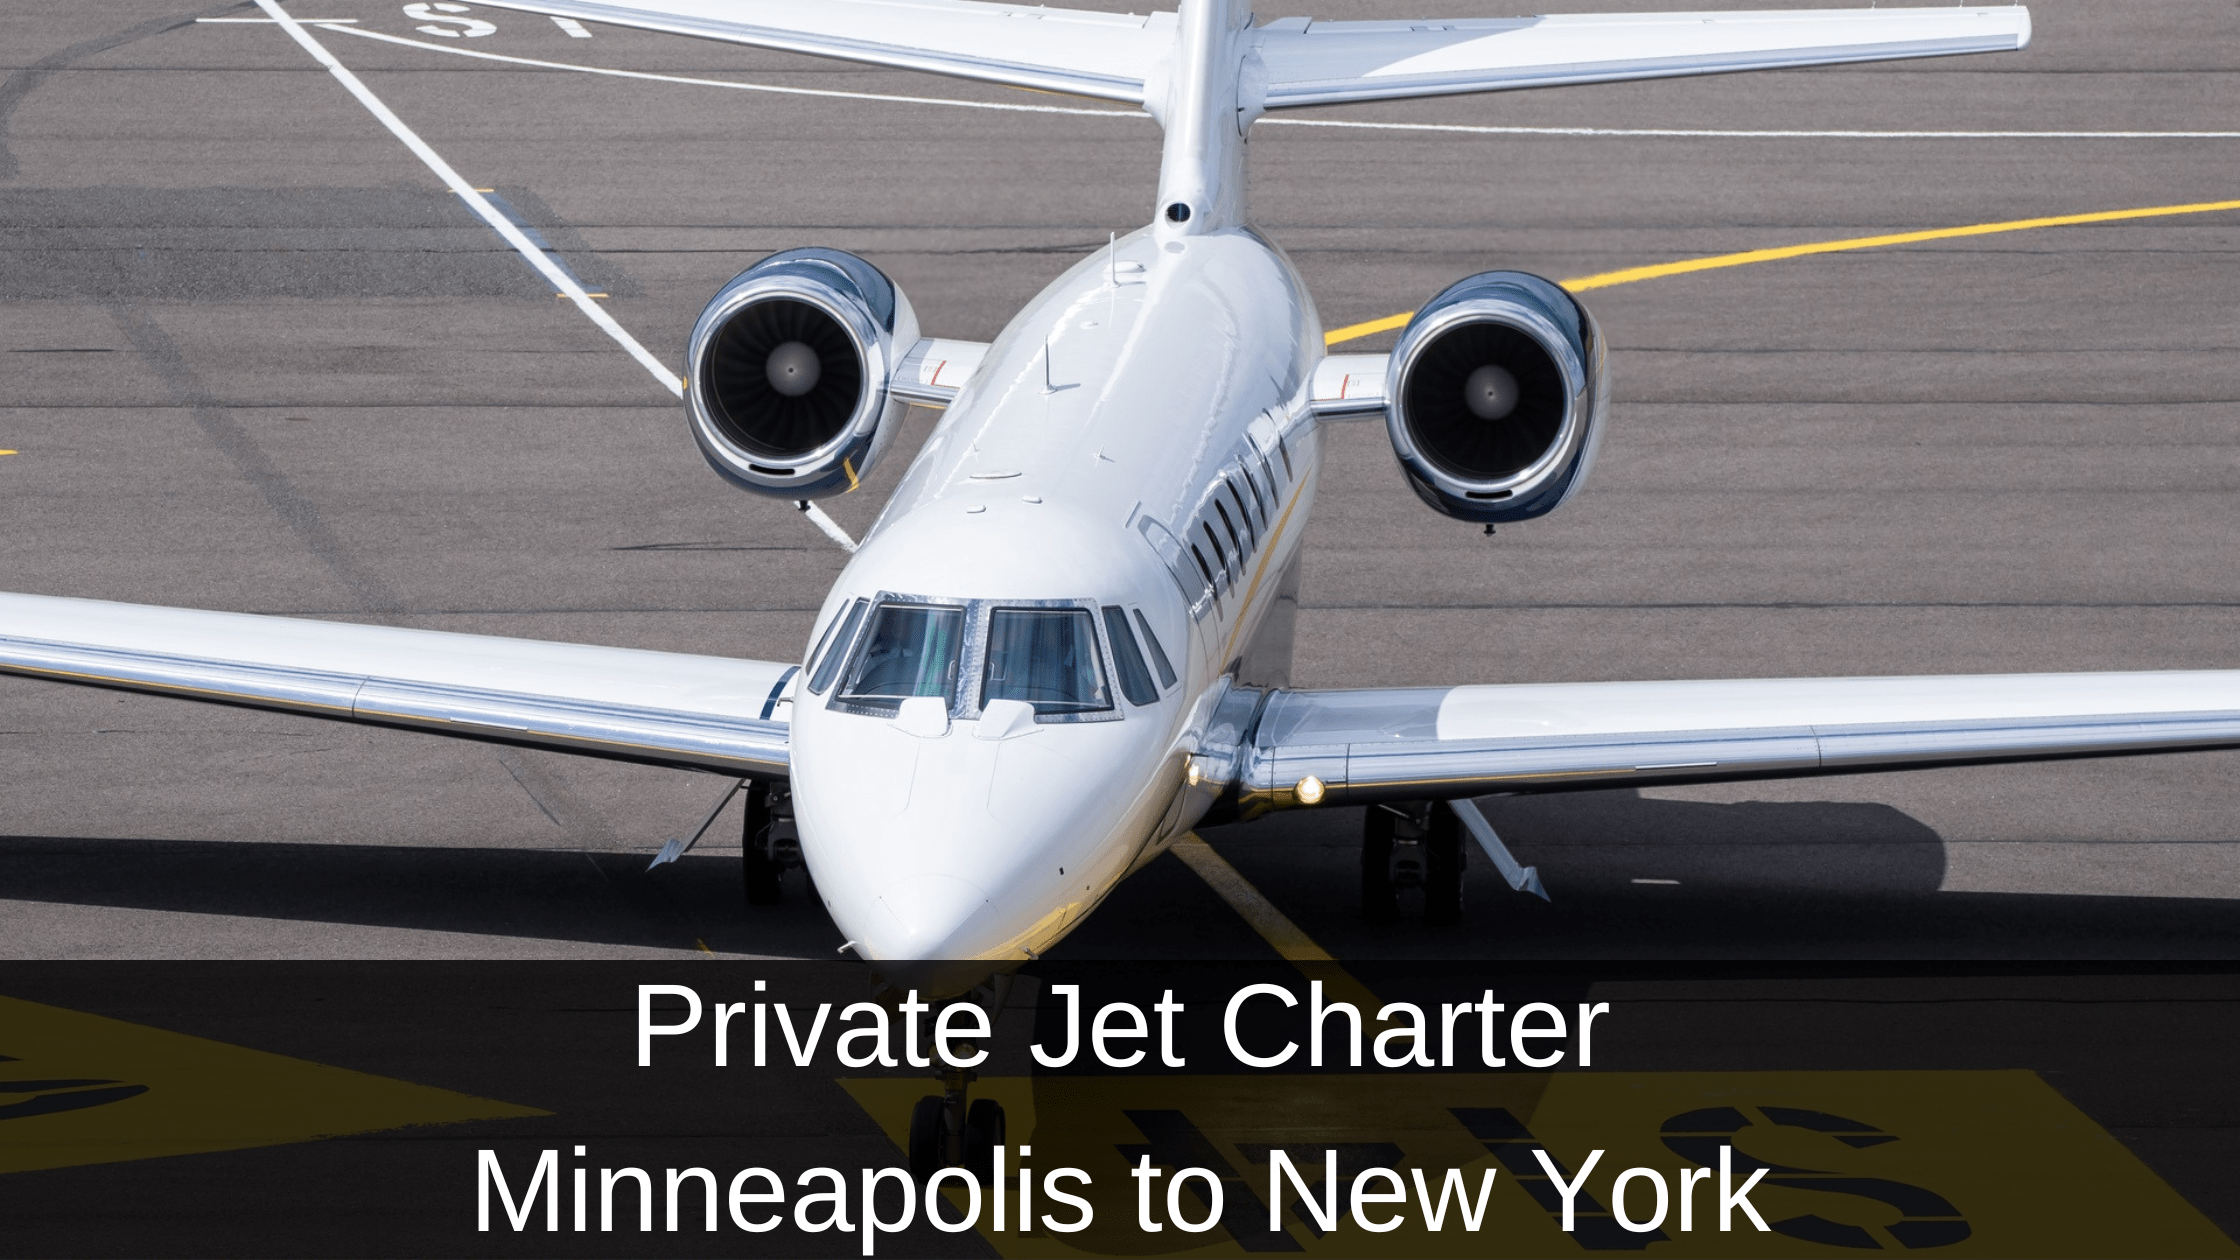 Private Jet Charter Minneapolis to New York